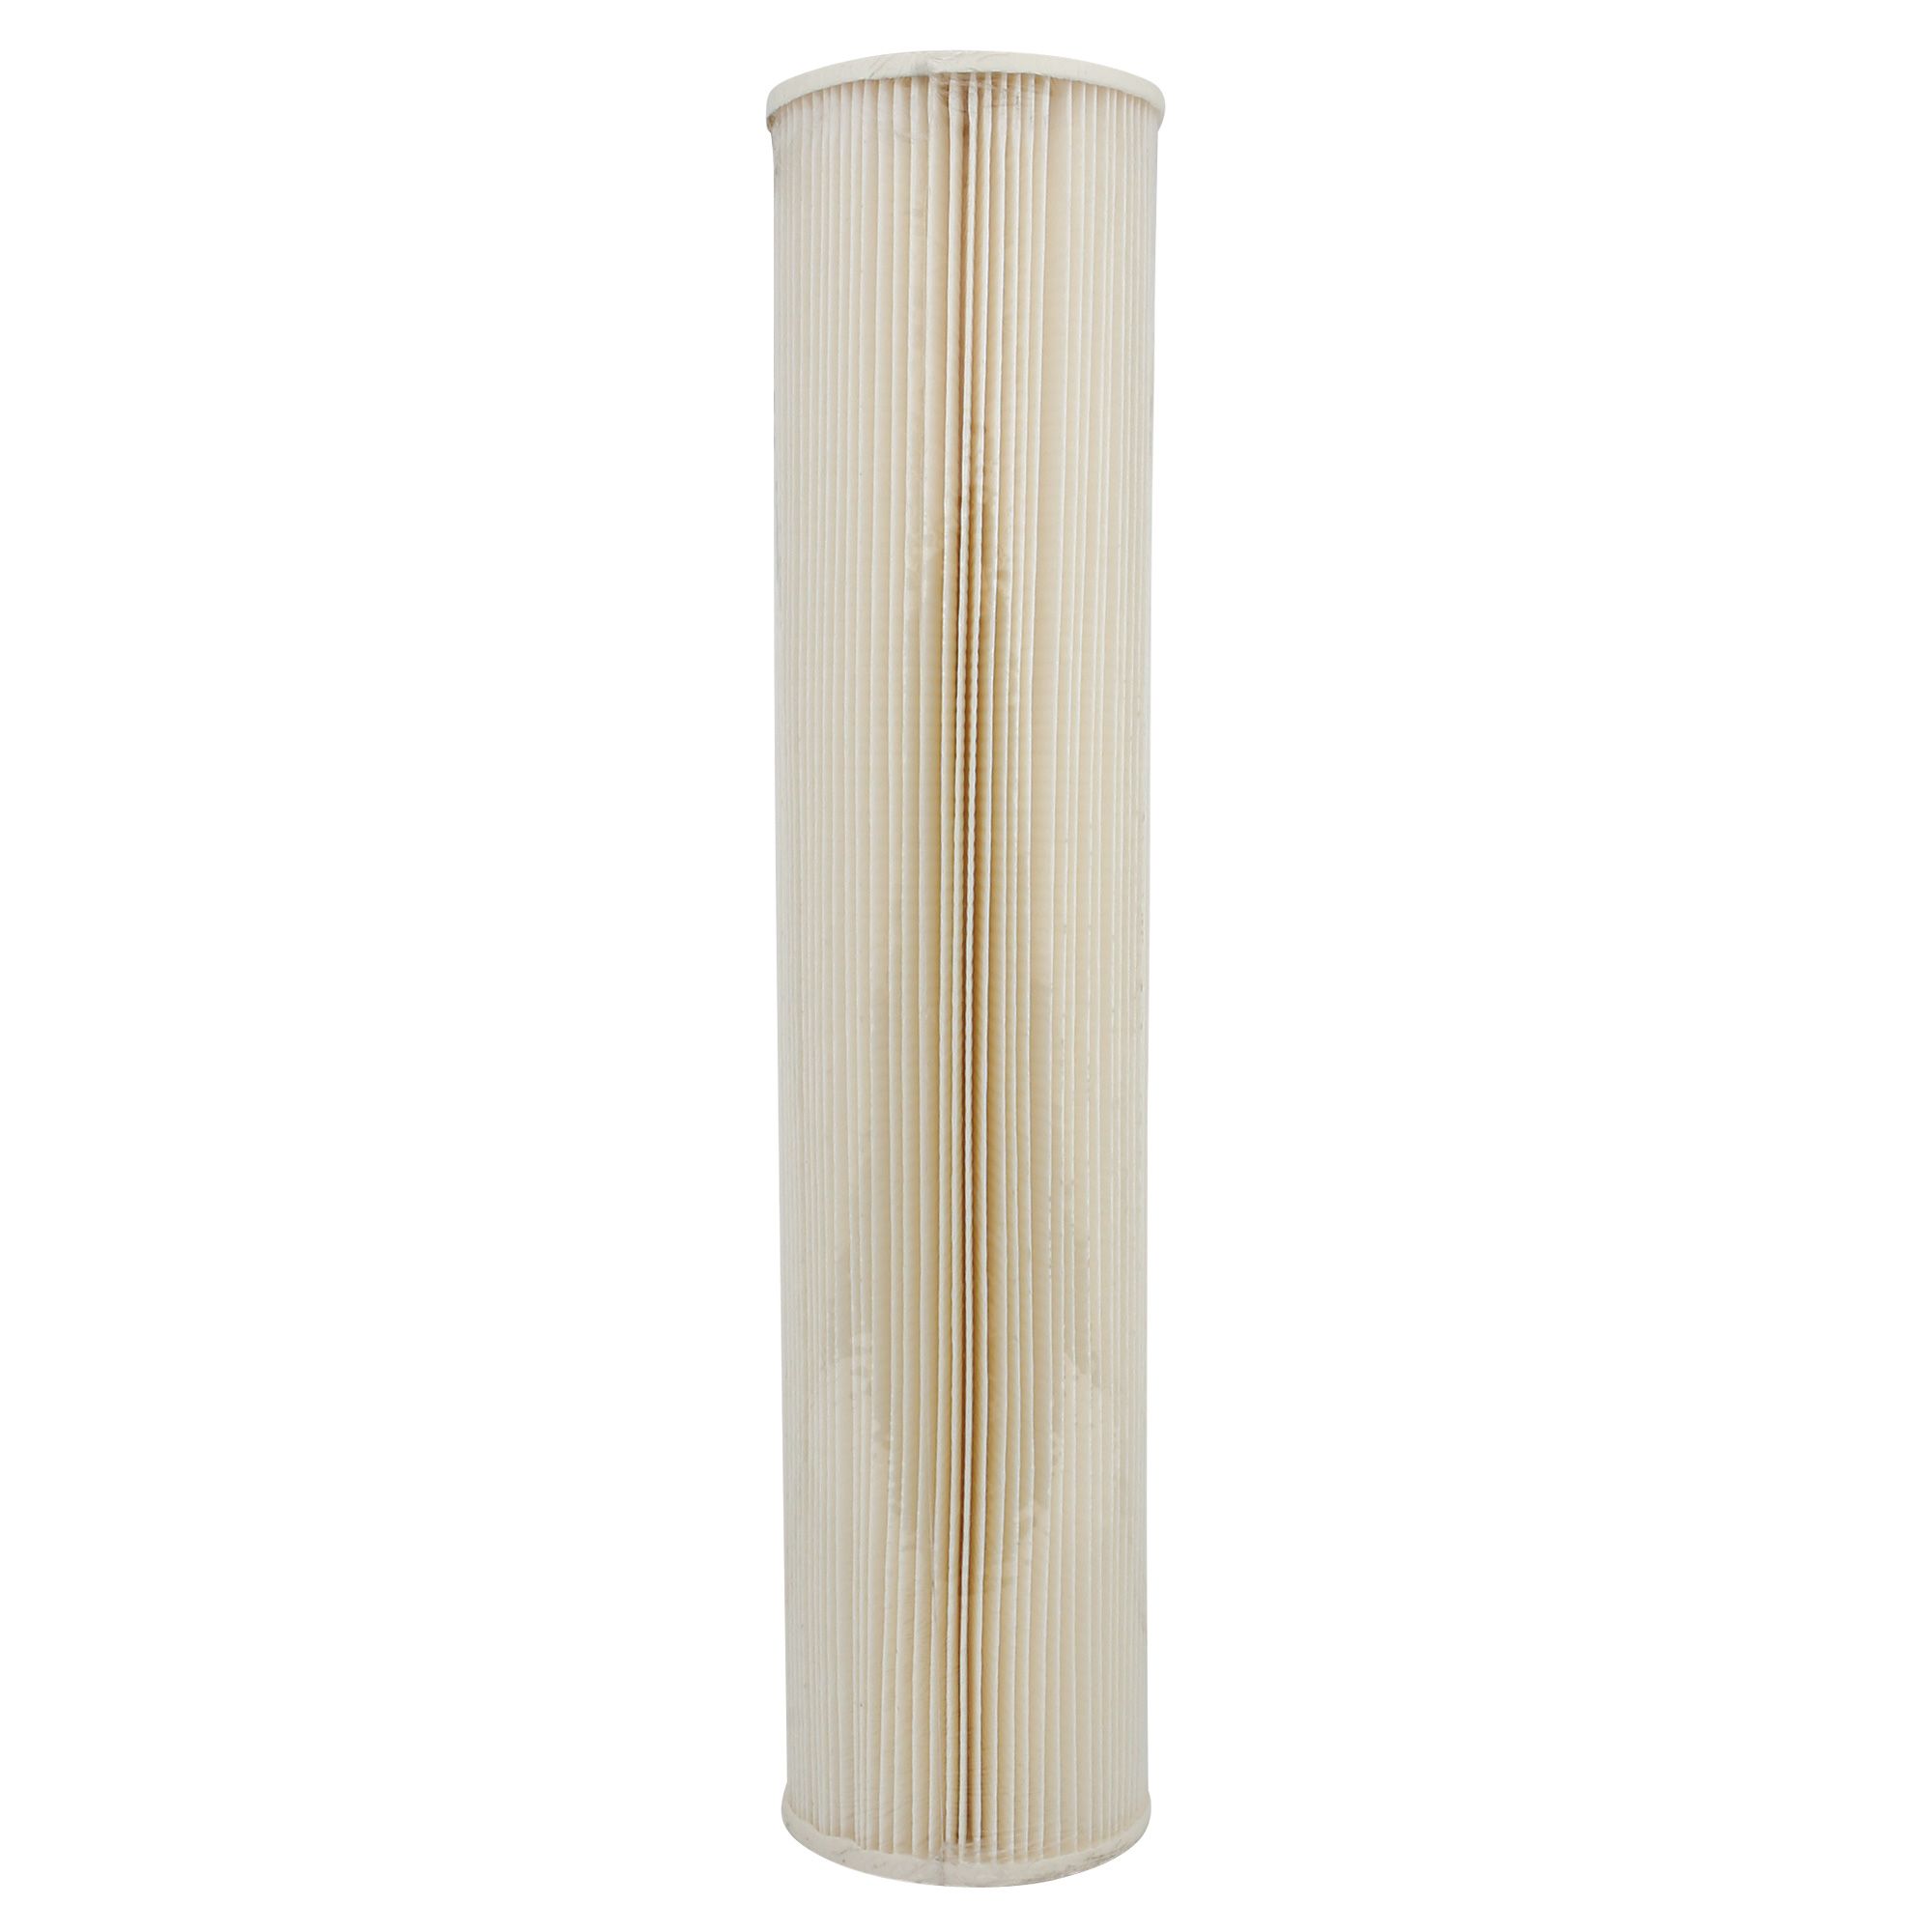 18 Length Cellulose/Polyester Blend Filter Media 13.86 OD TDC 10005404 OEM Replacement Cartridge Filter 